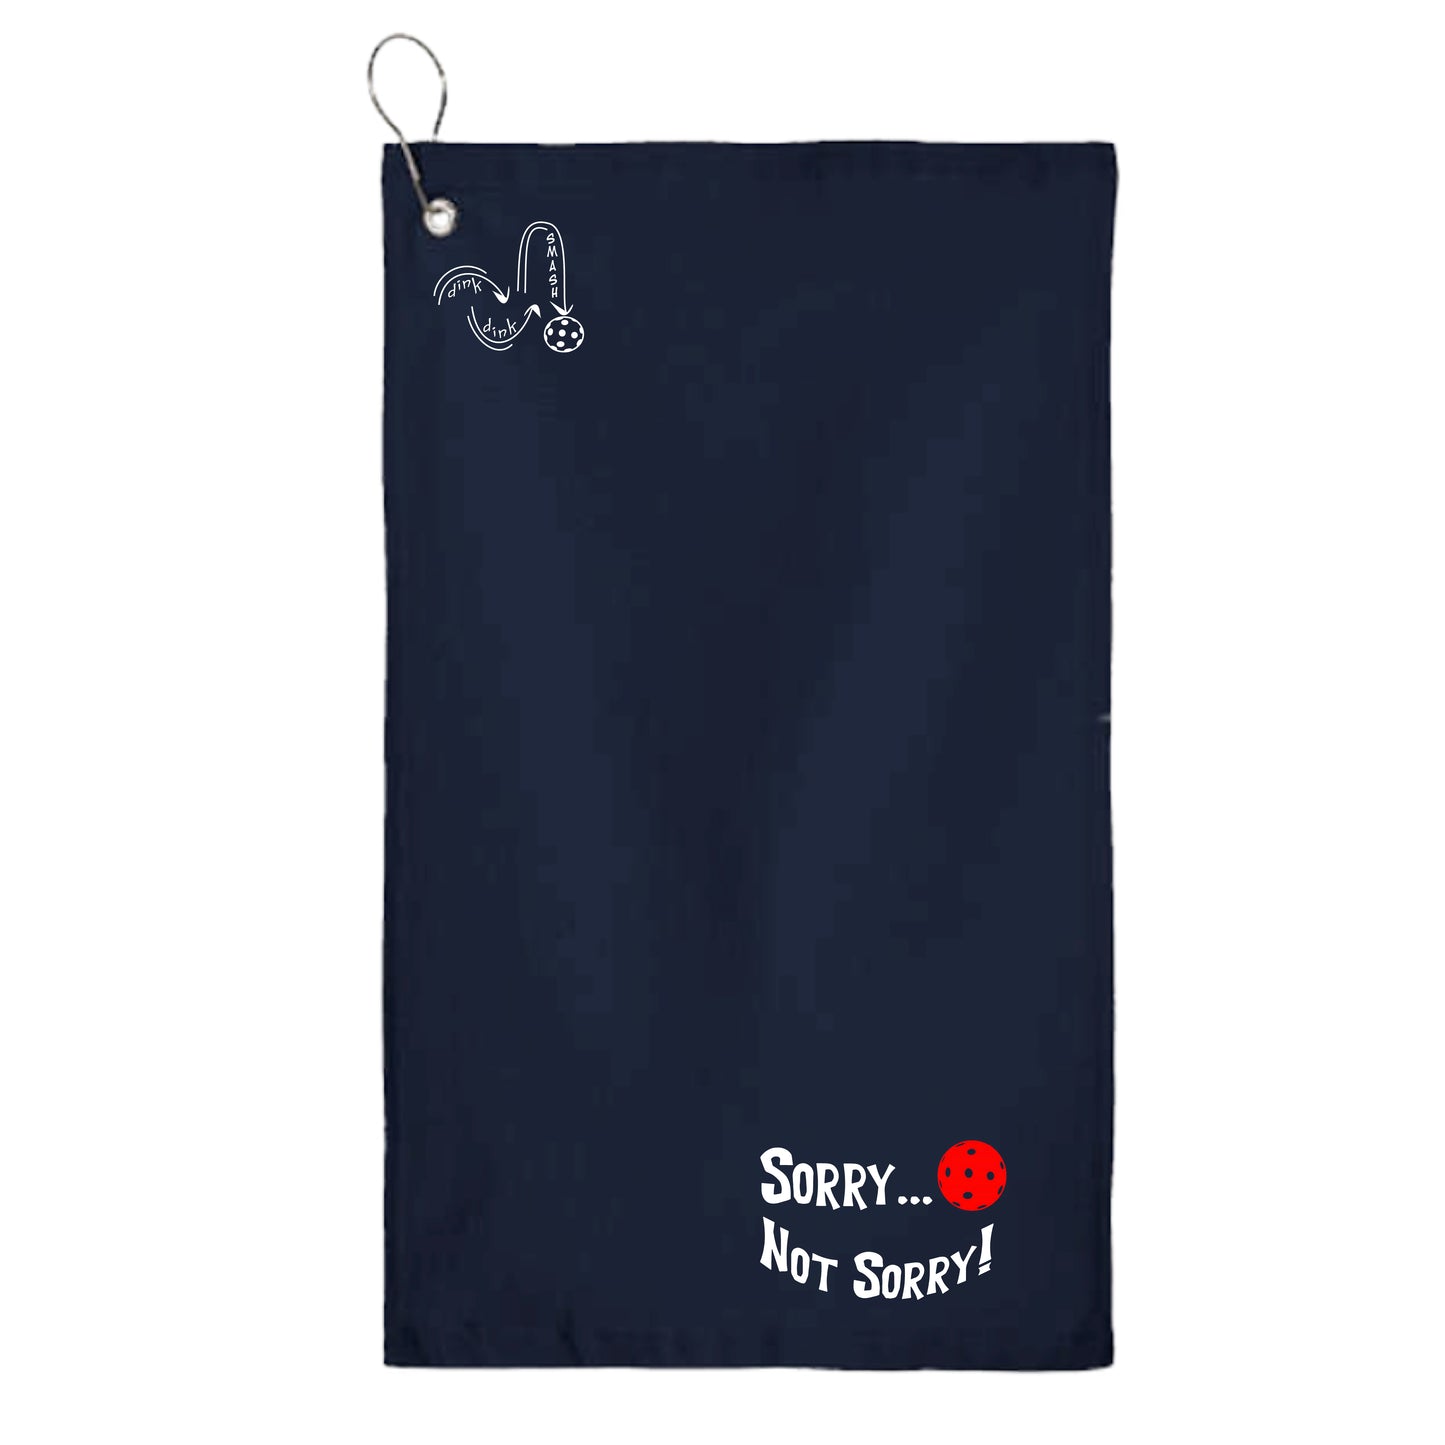 Sorry Not Sorry (Customizable Pickleball Color) | Pickleball Court Towels | Grommeted 100% Cotton Terry Velour